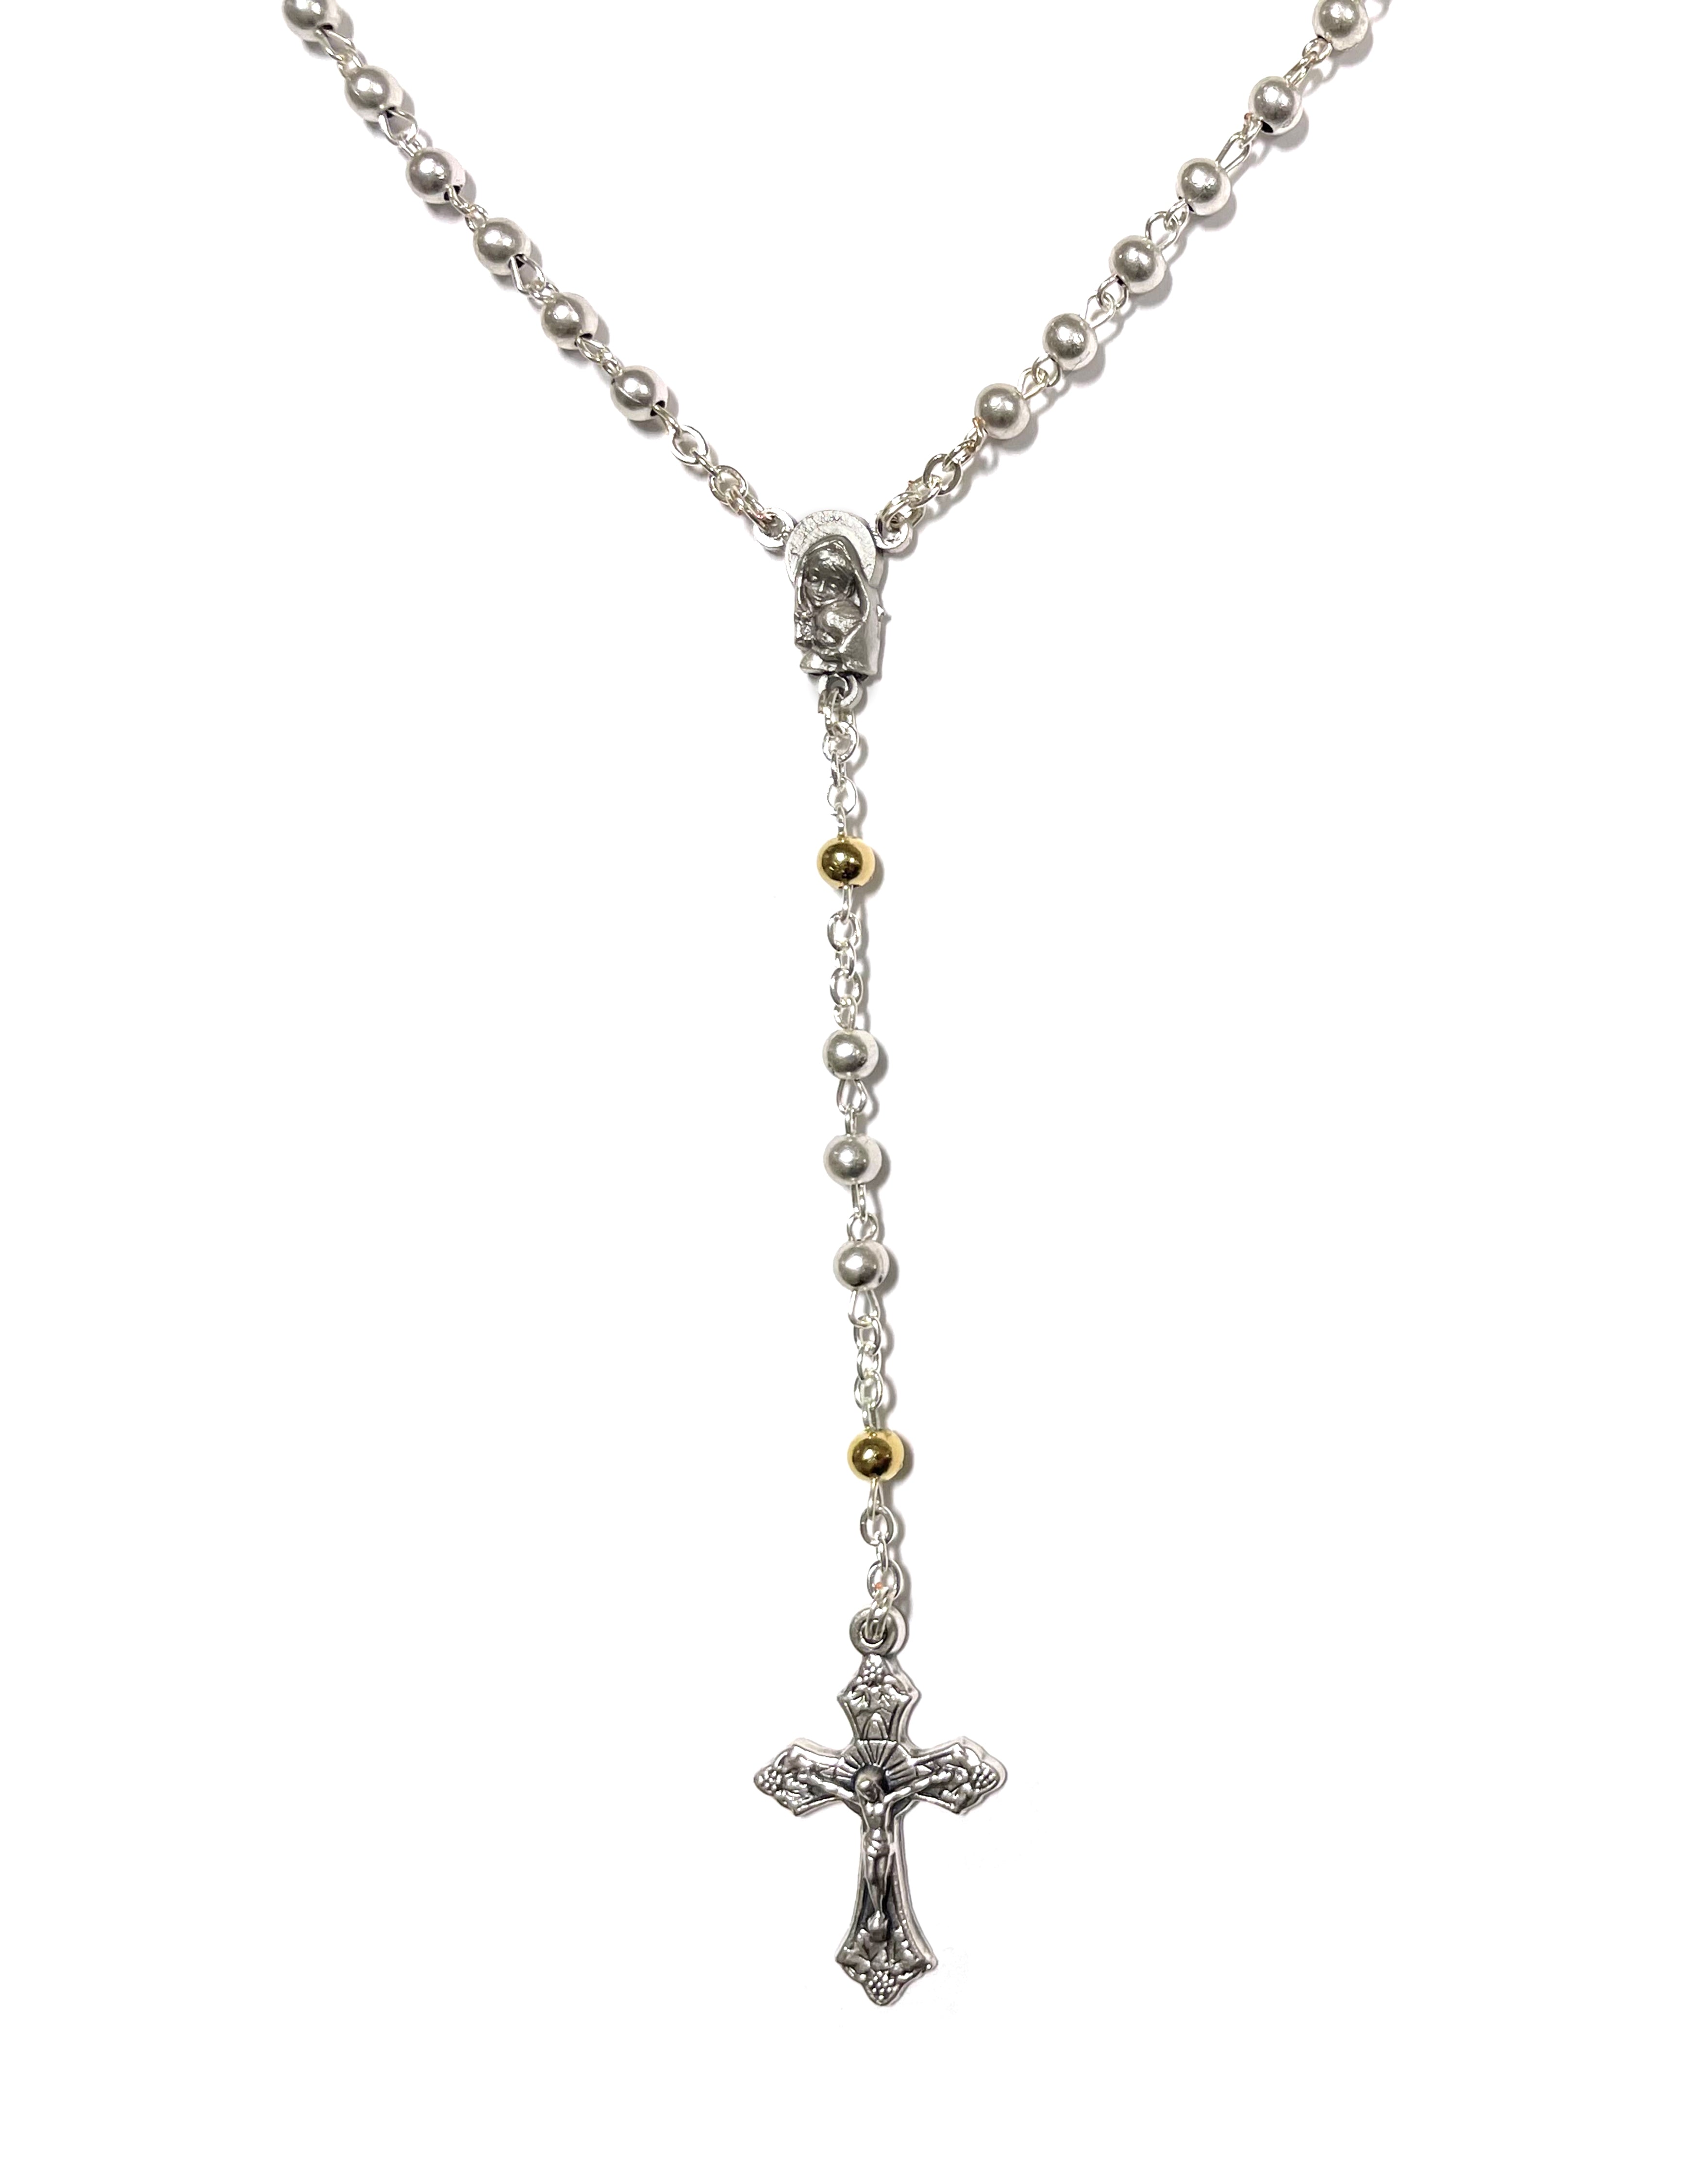 Oxidized silver rosary with gold details